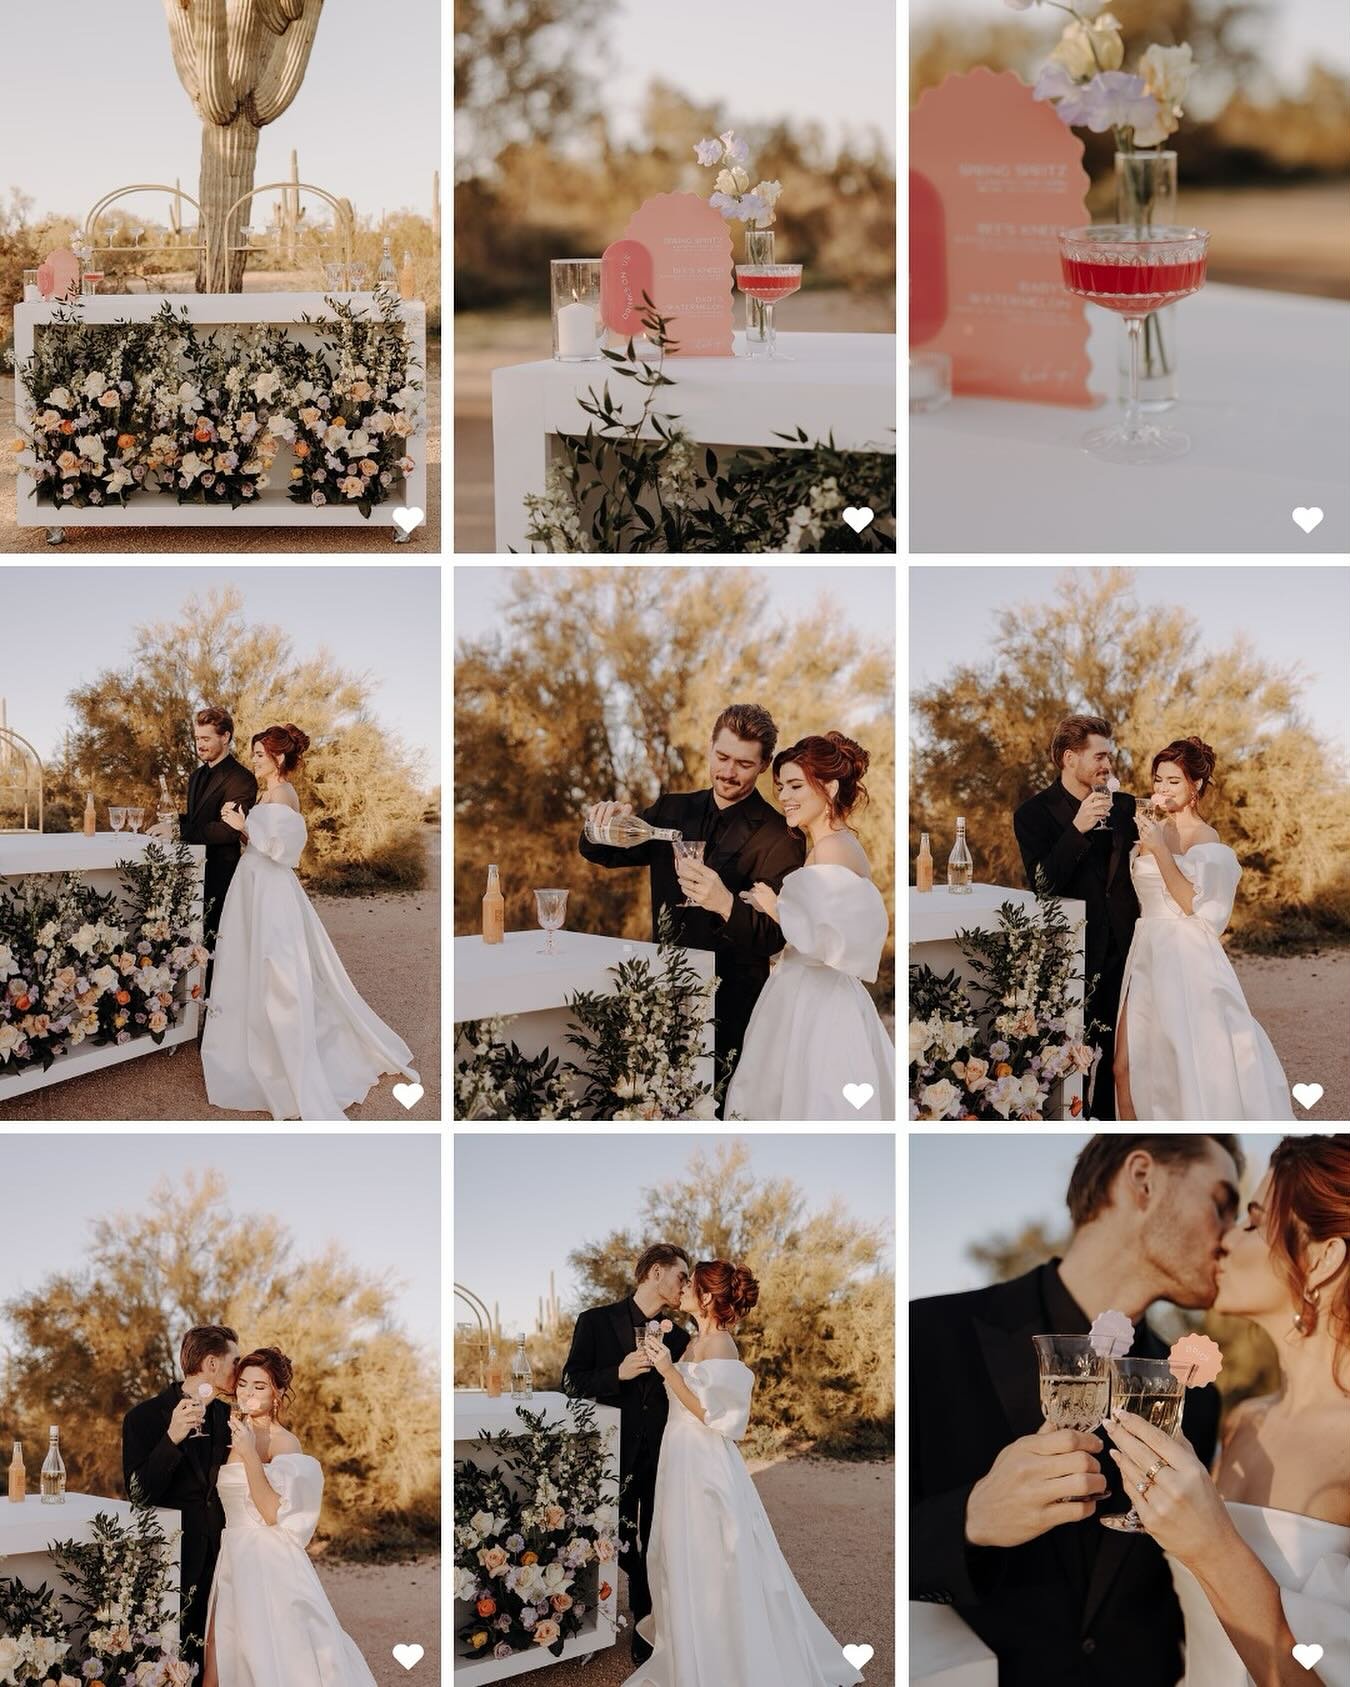 When every photo your photographer sends you is perfect 🤍🎀✨
.
.
Design/Rentals: @letsbashevents
Venue: @clothandflame
Florist: @bellarose.blooms
Photo: @carmelajoyphotography
Video: @wedcofilms
Models:@kendy.du &amp; @zhyzdu
Signage: @asterandpalm
